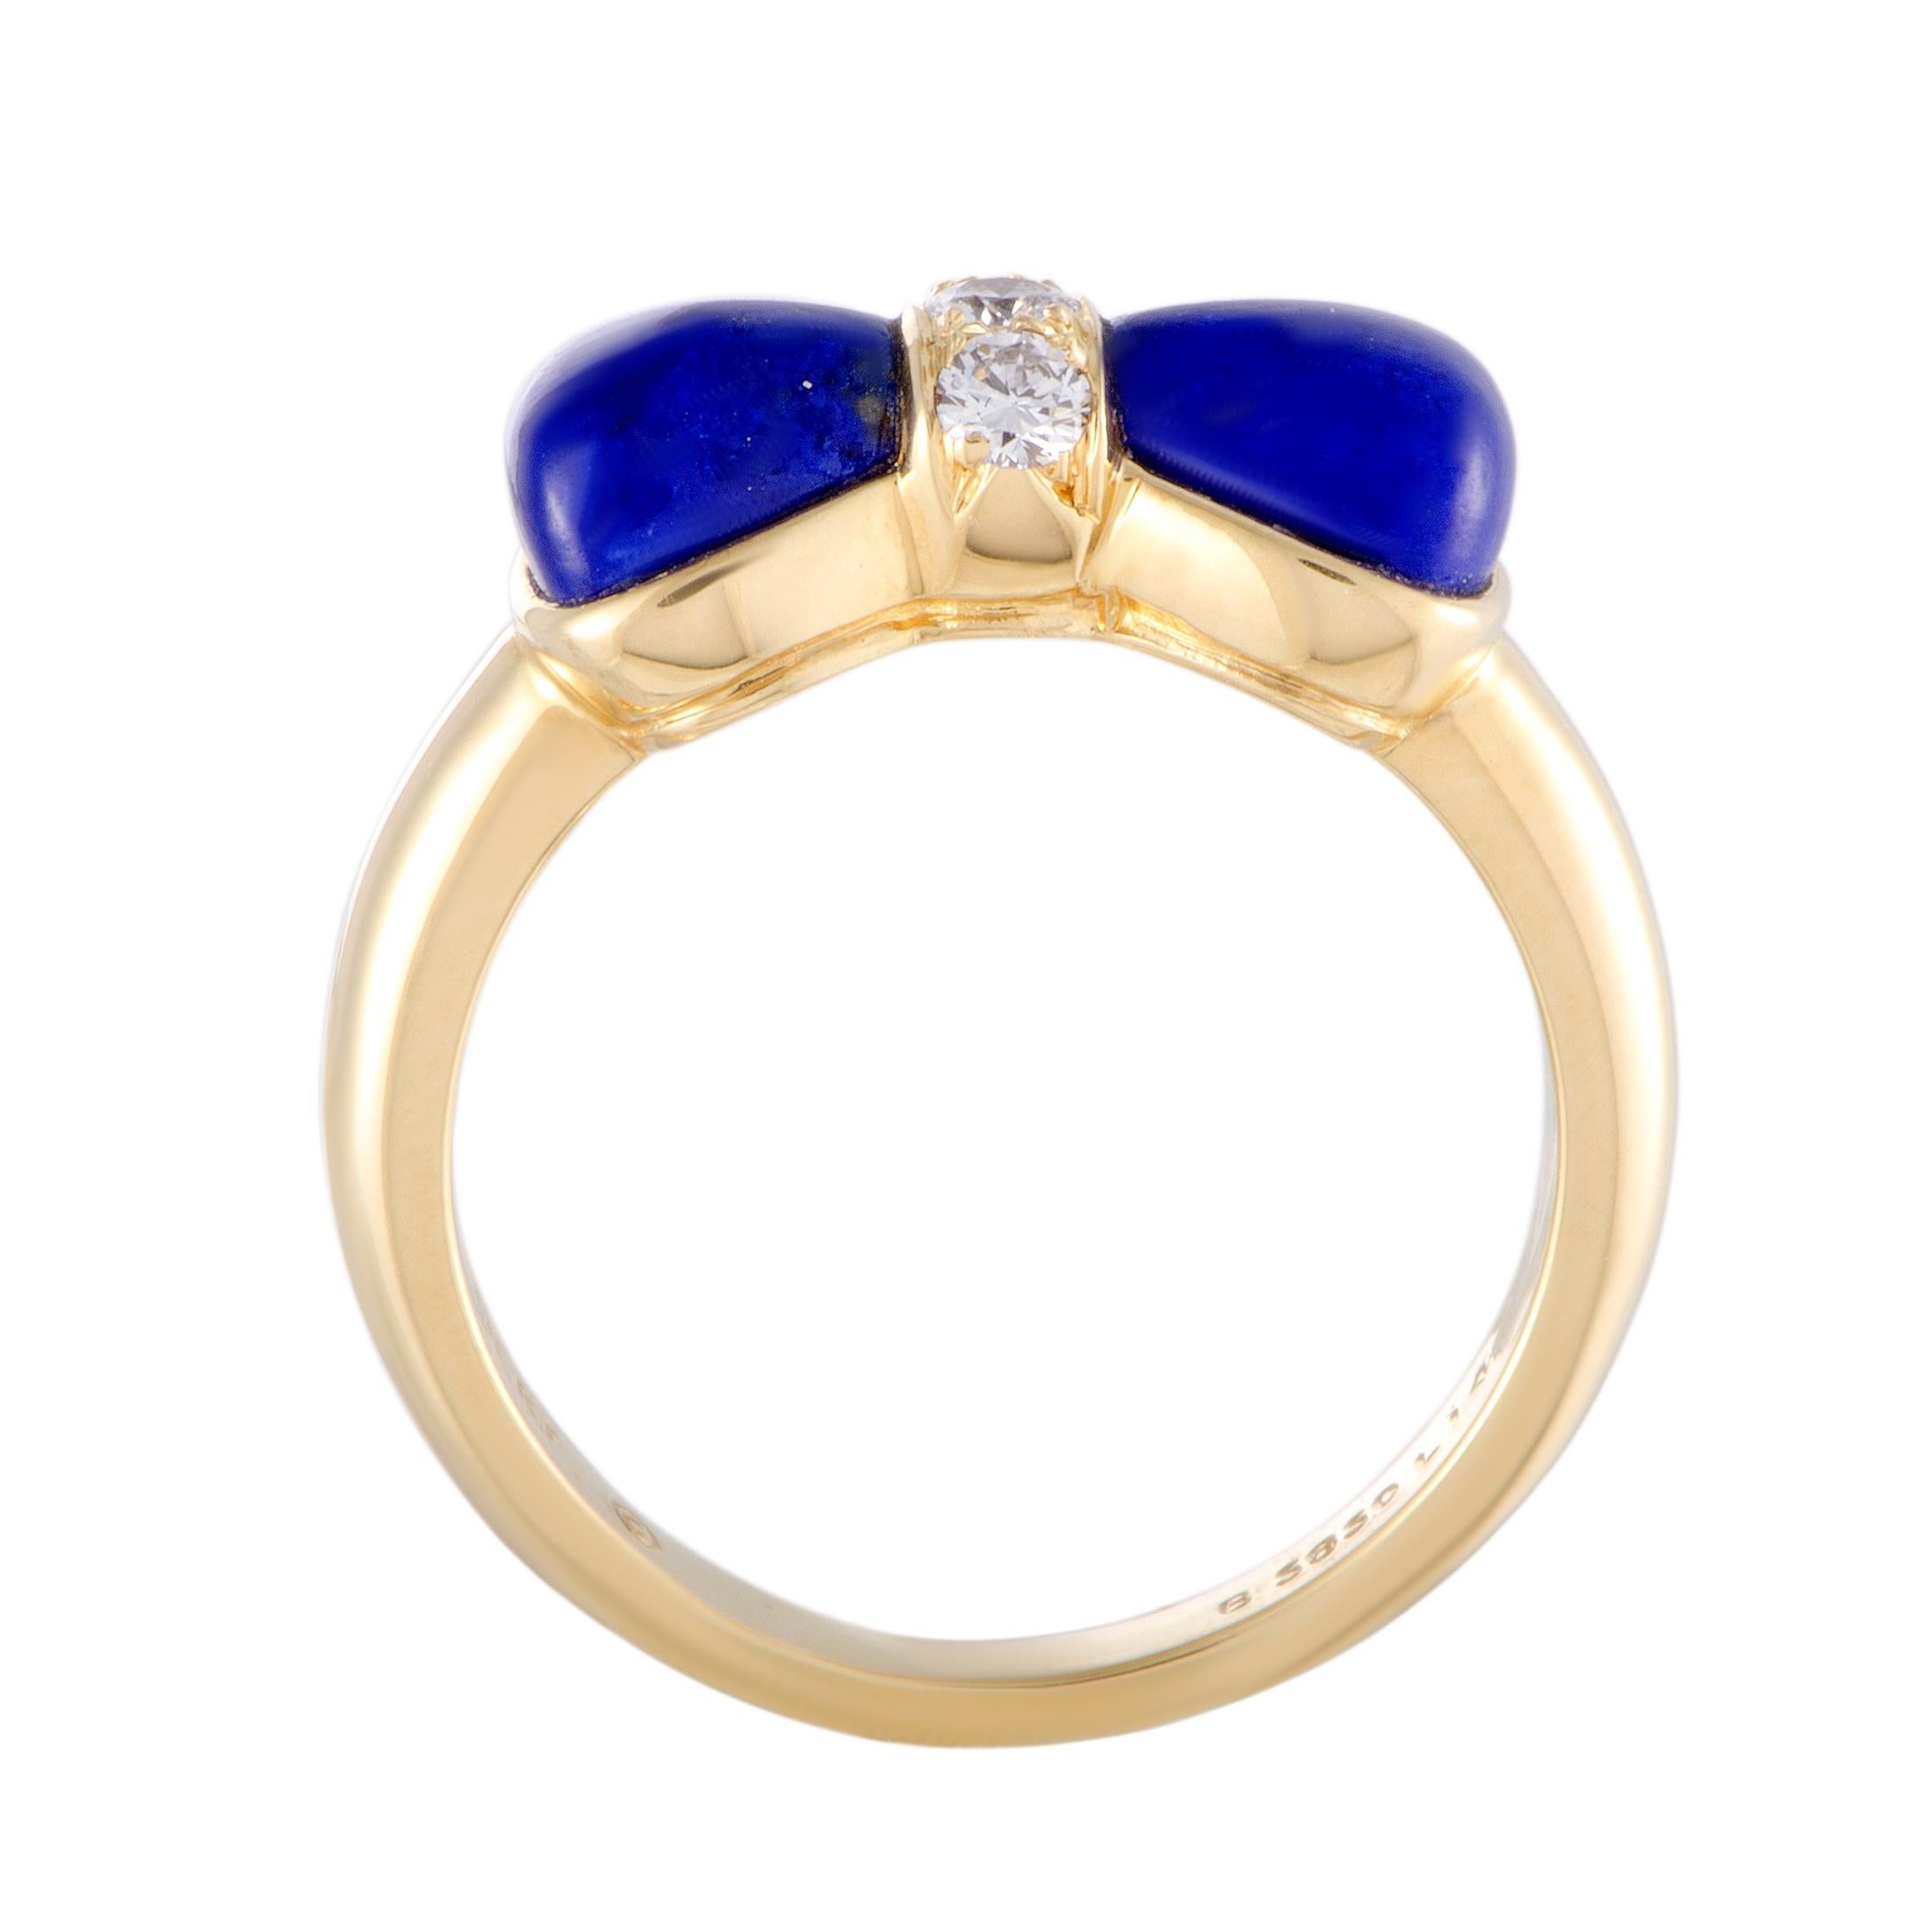 Featuring a gorgeously feminine appearance that the Van Cleef & Arpels pieces are renowned for, this beautiful ring will embellish your look in an irresistibly attractive manner. The ring is made of 18K yellow gold and decorated with lapis lazuli